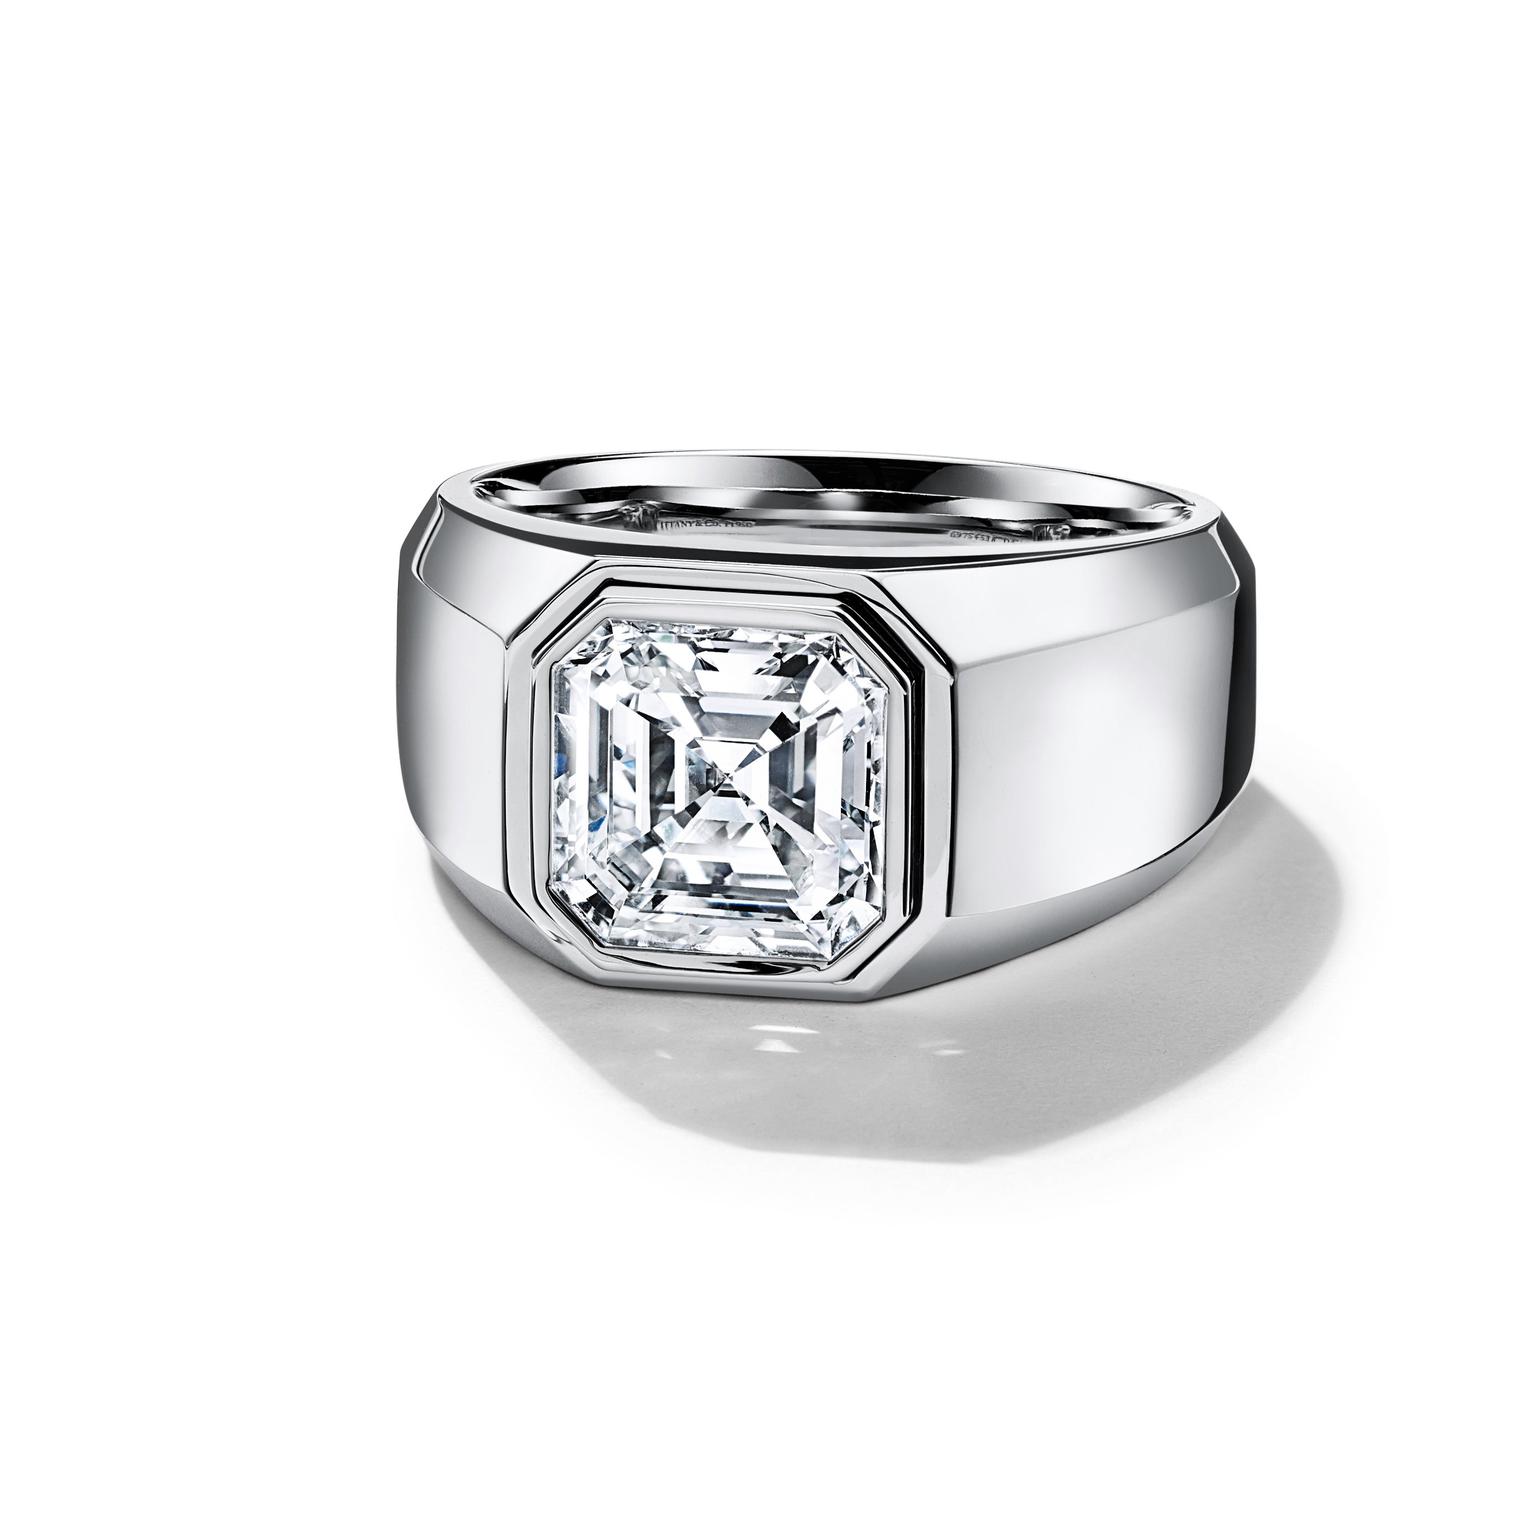 He said yes: Engagement rings for men